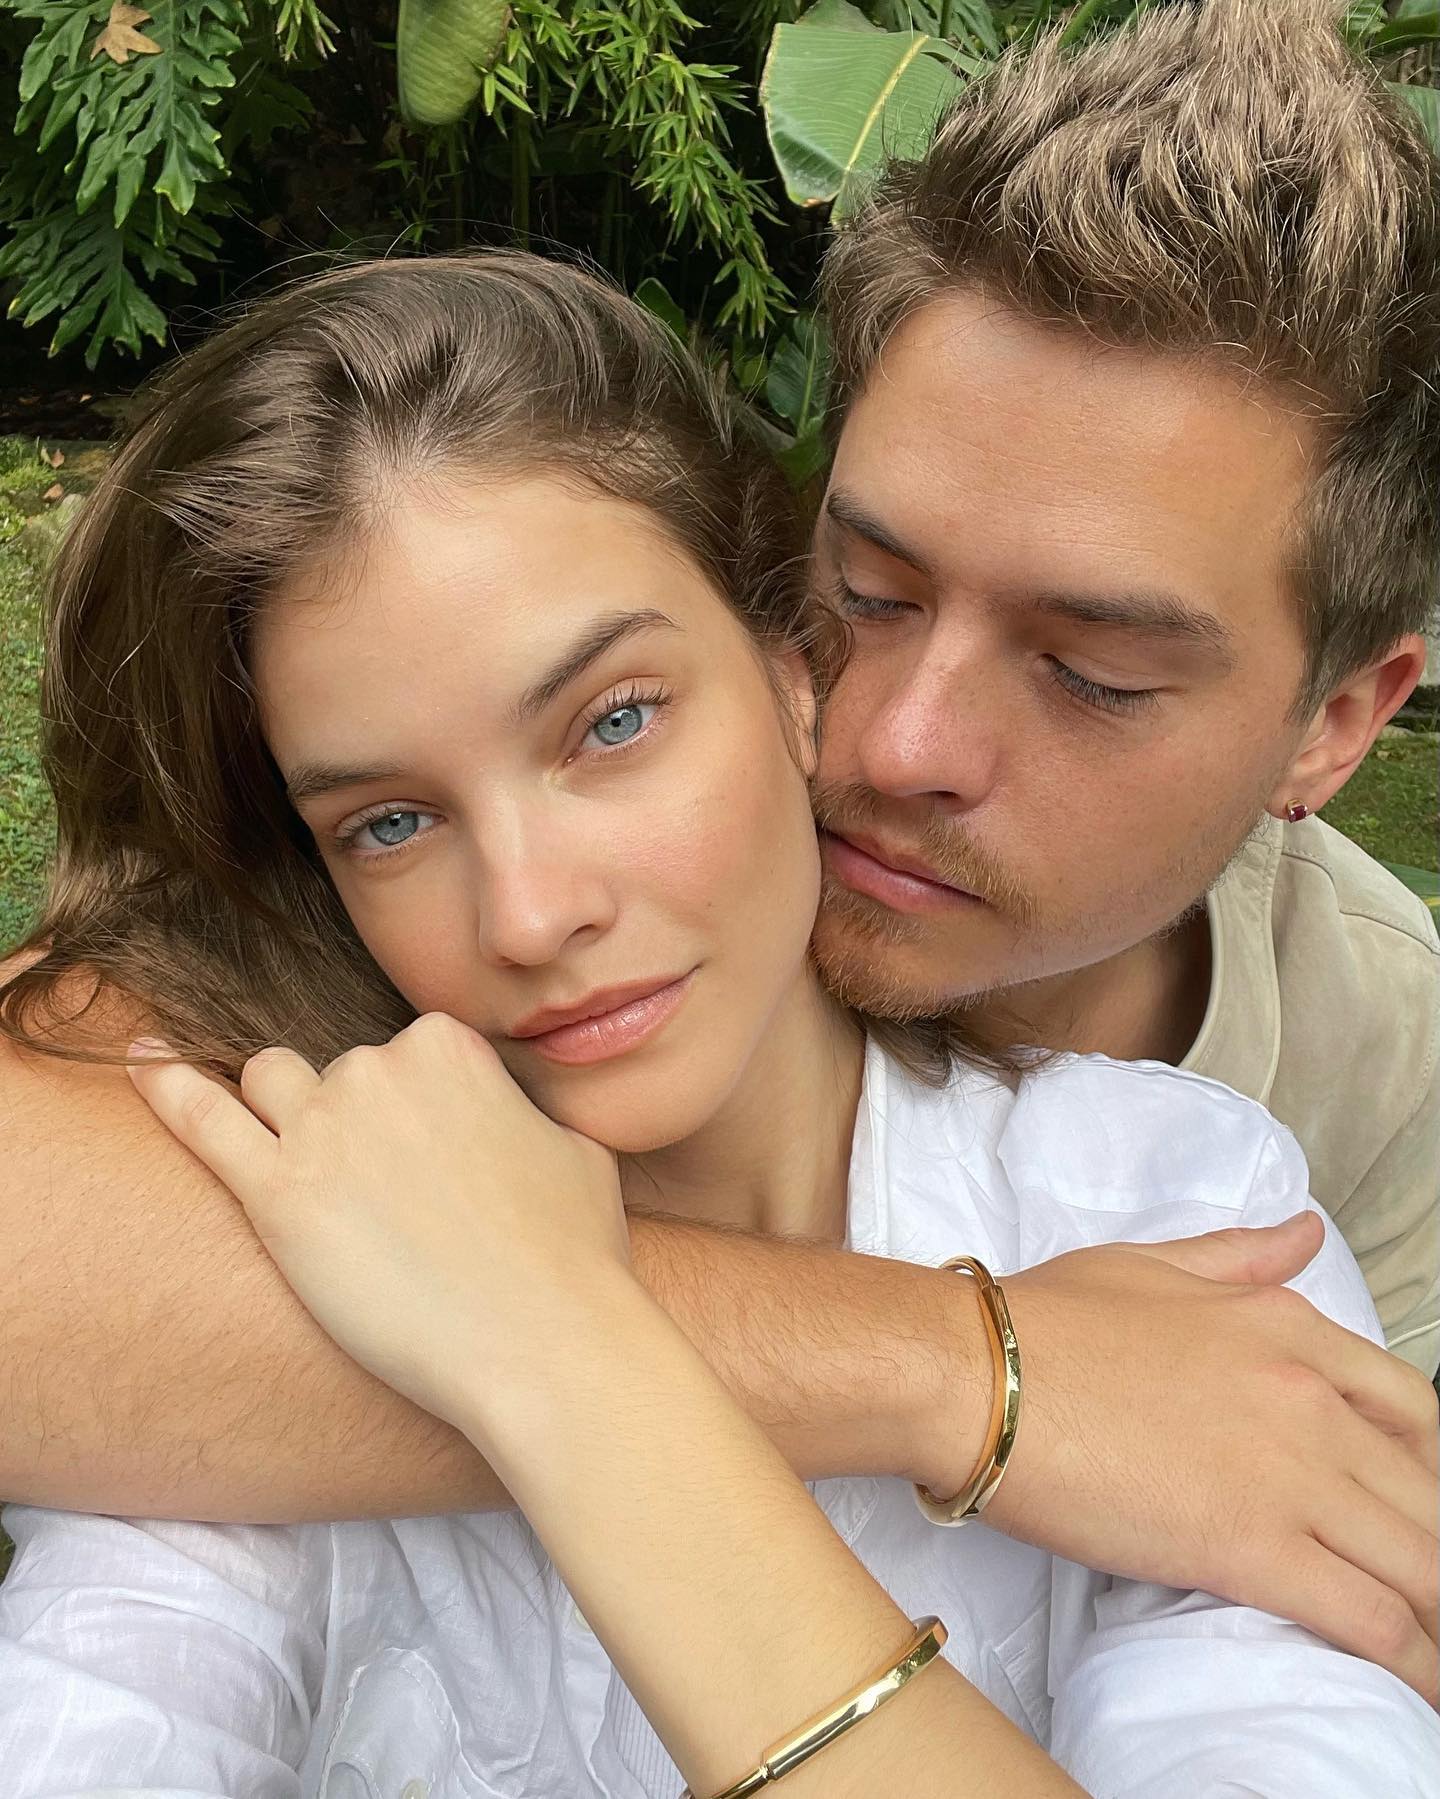 Barbara Palvin and Dylan Sprouse engaged